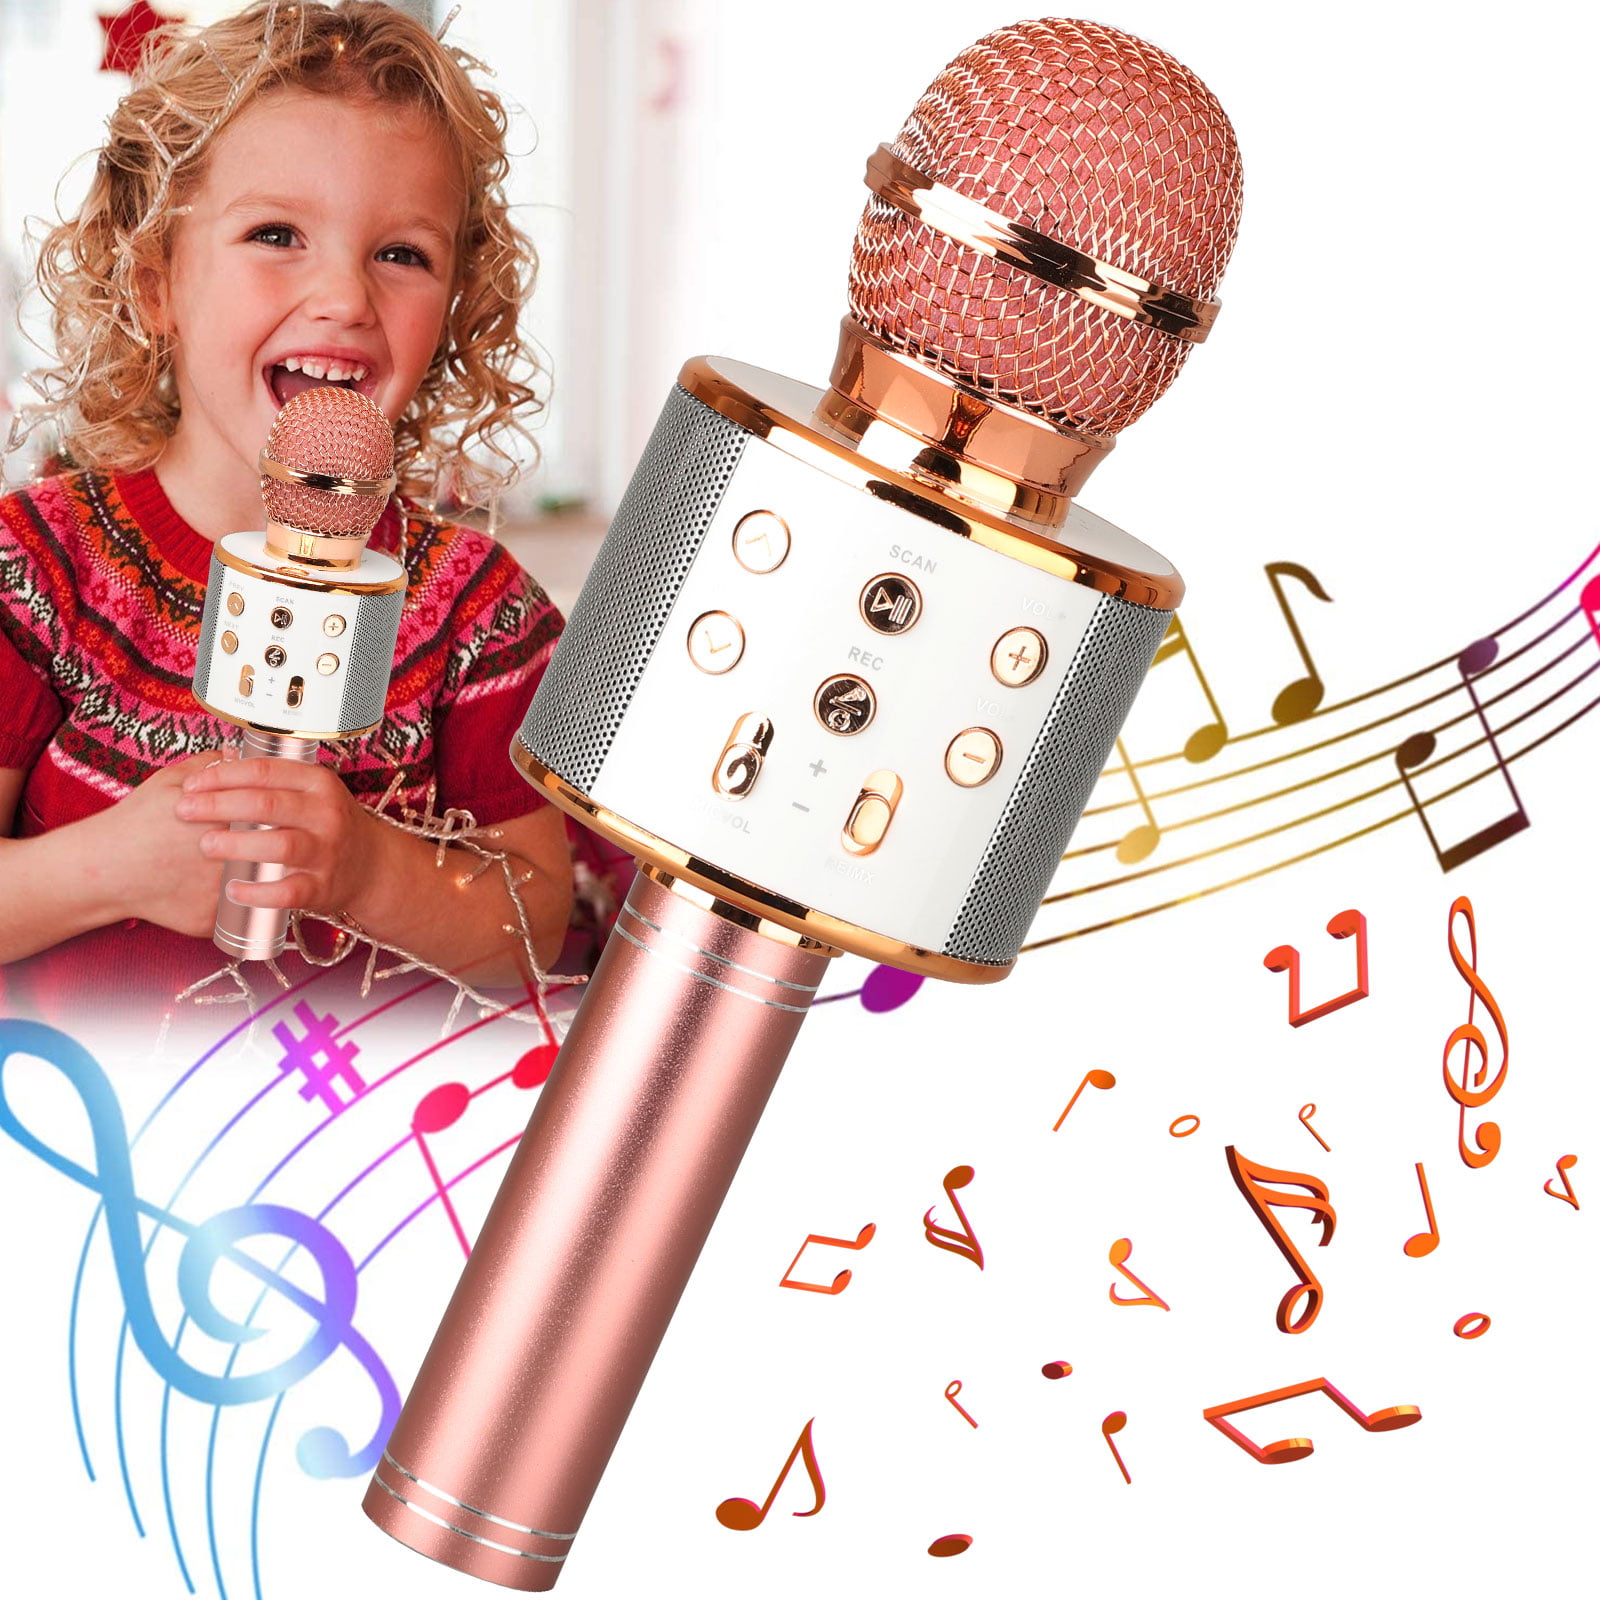 Pink TSUN Kids Microphone,Wireless Karaoke Microphone for Kids Girls with Speakers,Song Recording and Voice Changer,Top Birthday Gift for 5-12 yrs Old Young Little Girls,Best Presents for Kids Girls 